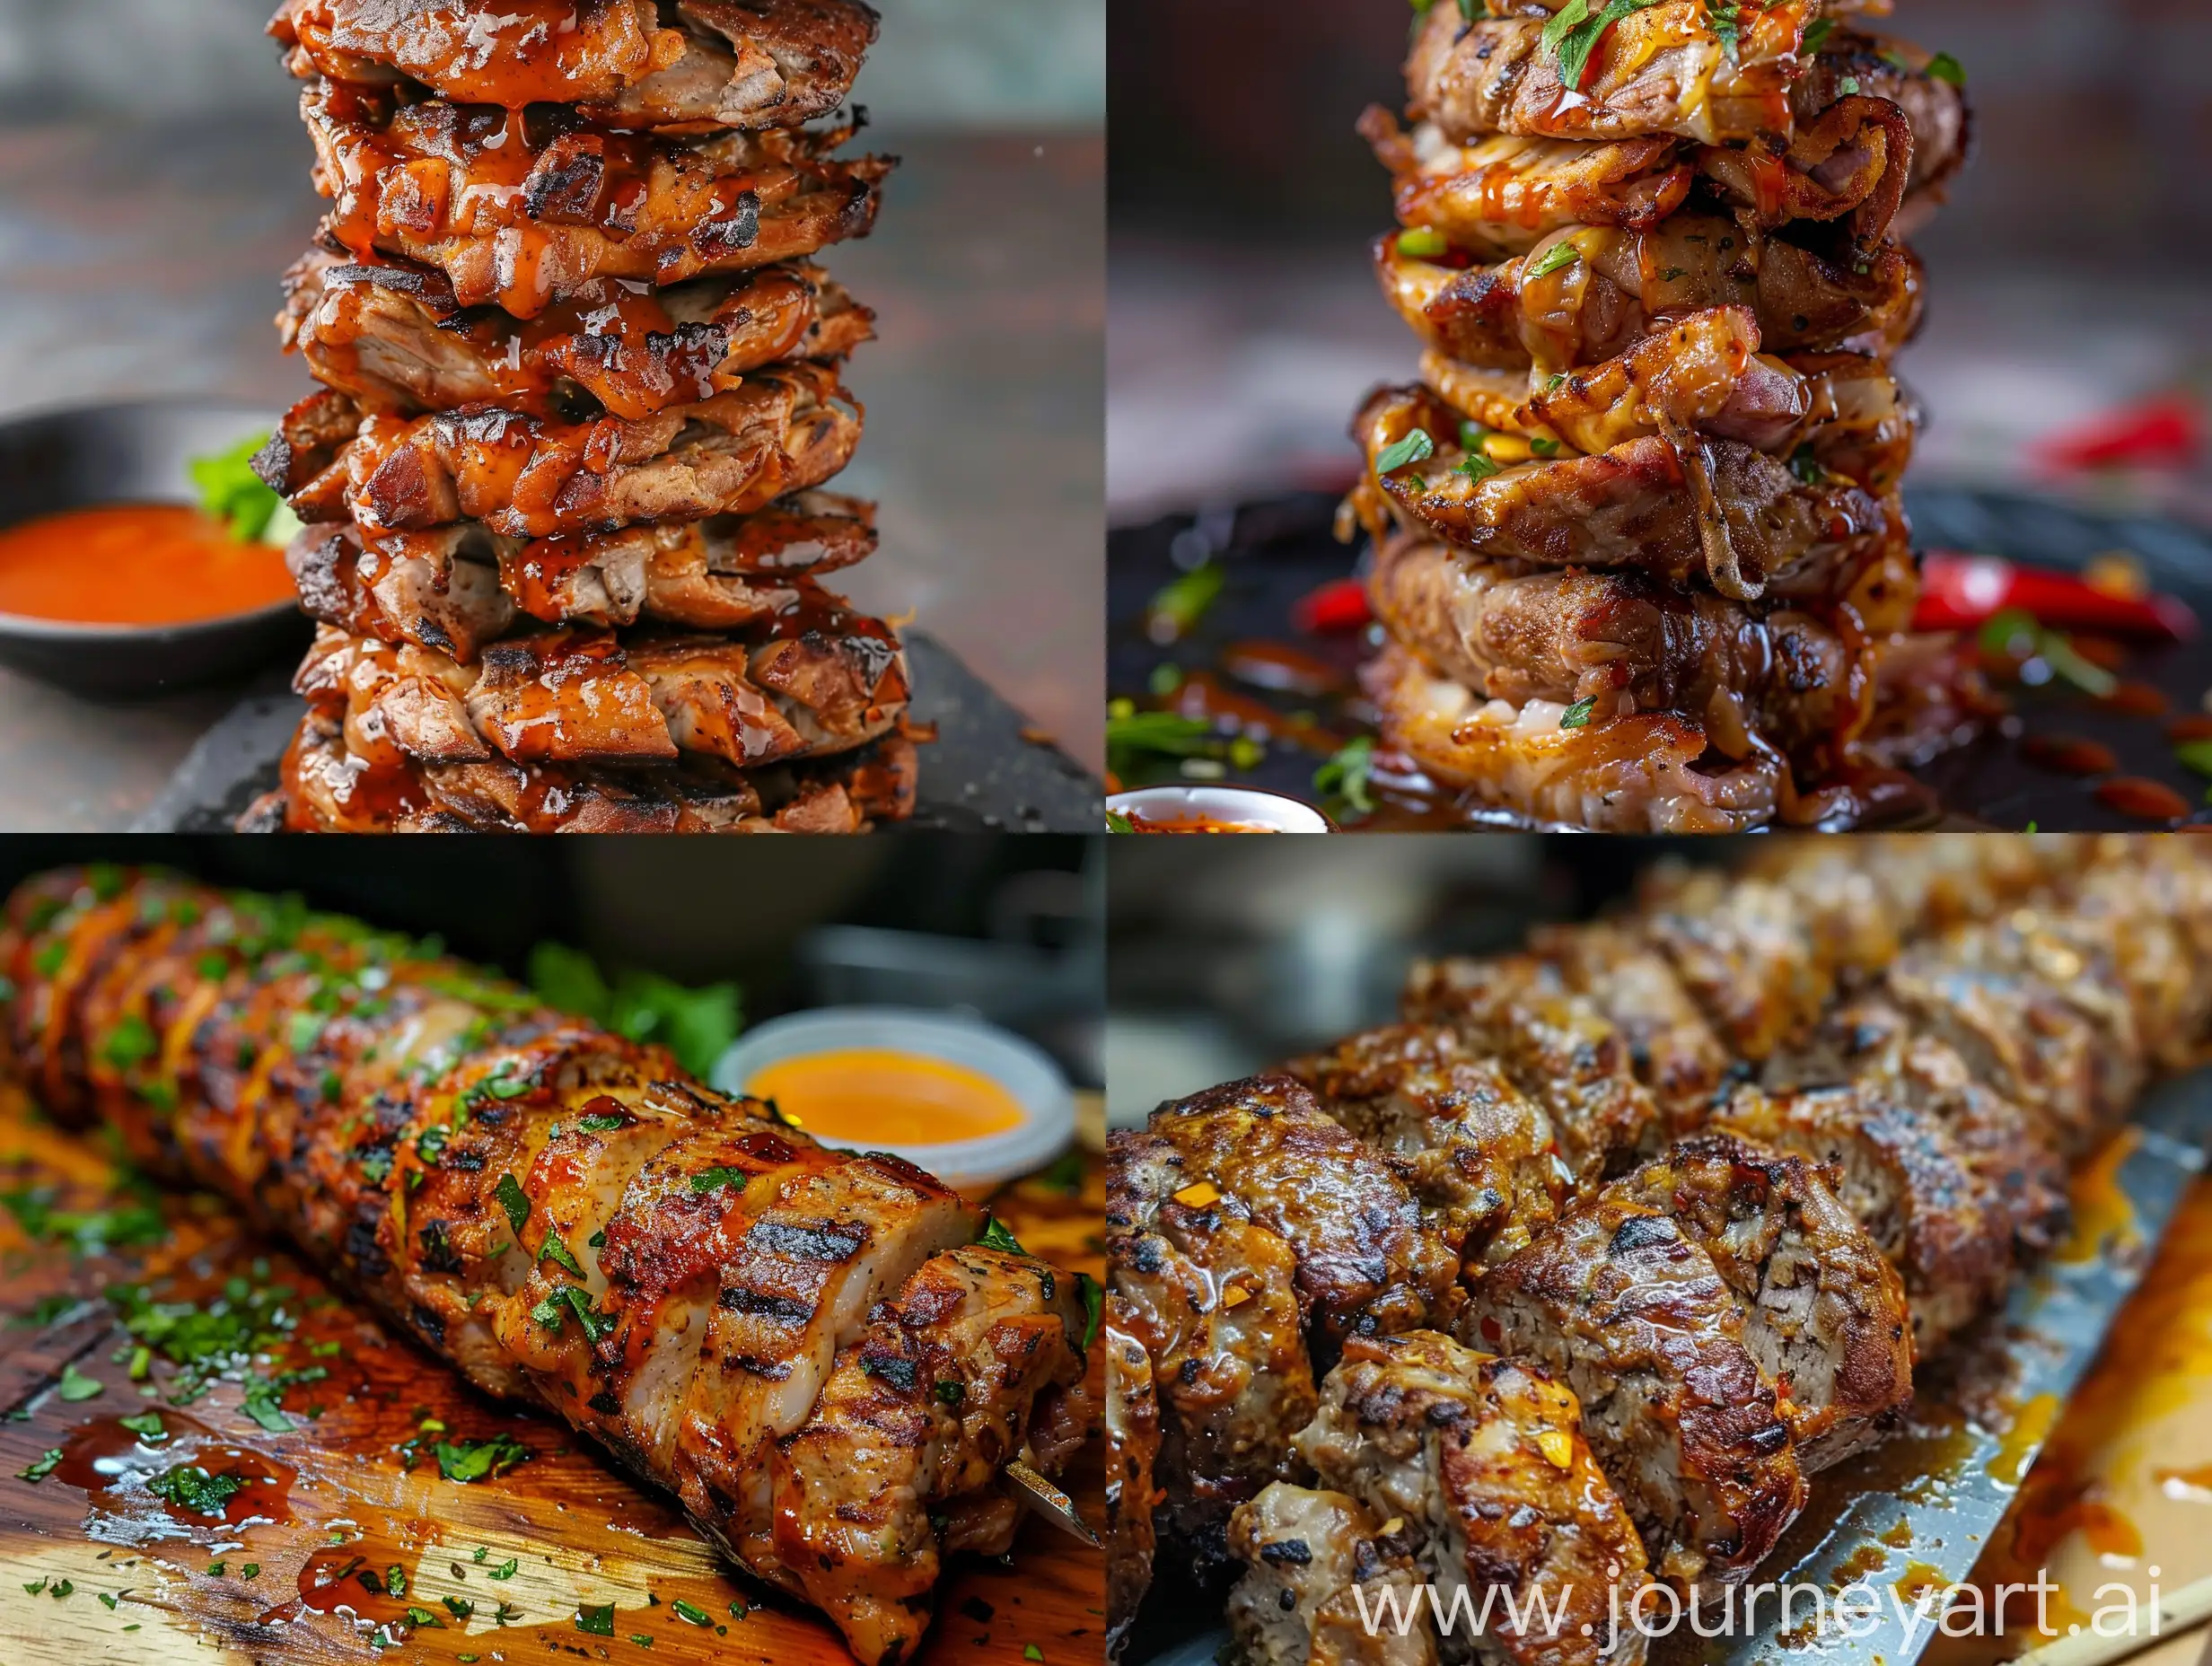 Irresistible-Vertical-Shawarma-Delight-with-Savory-Sauce